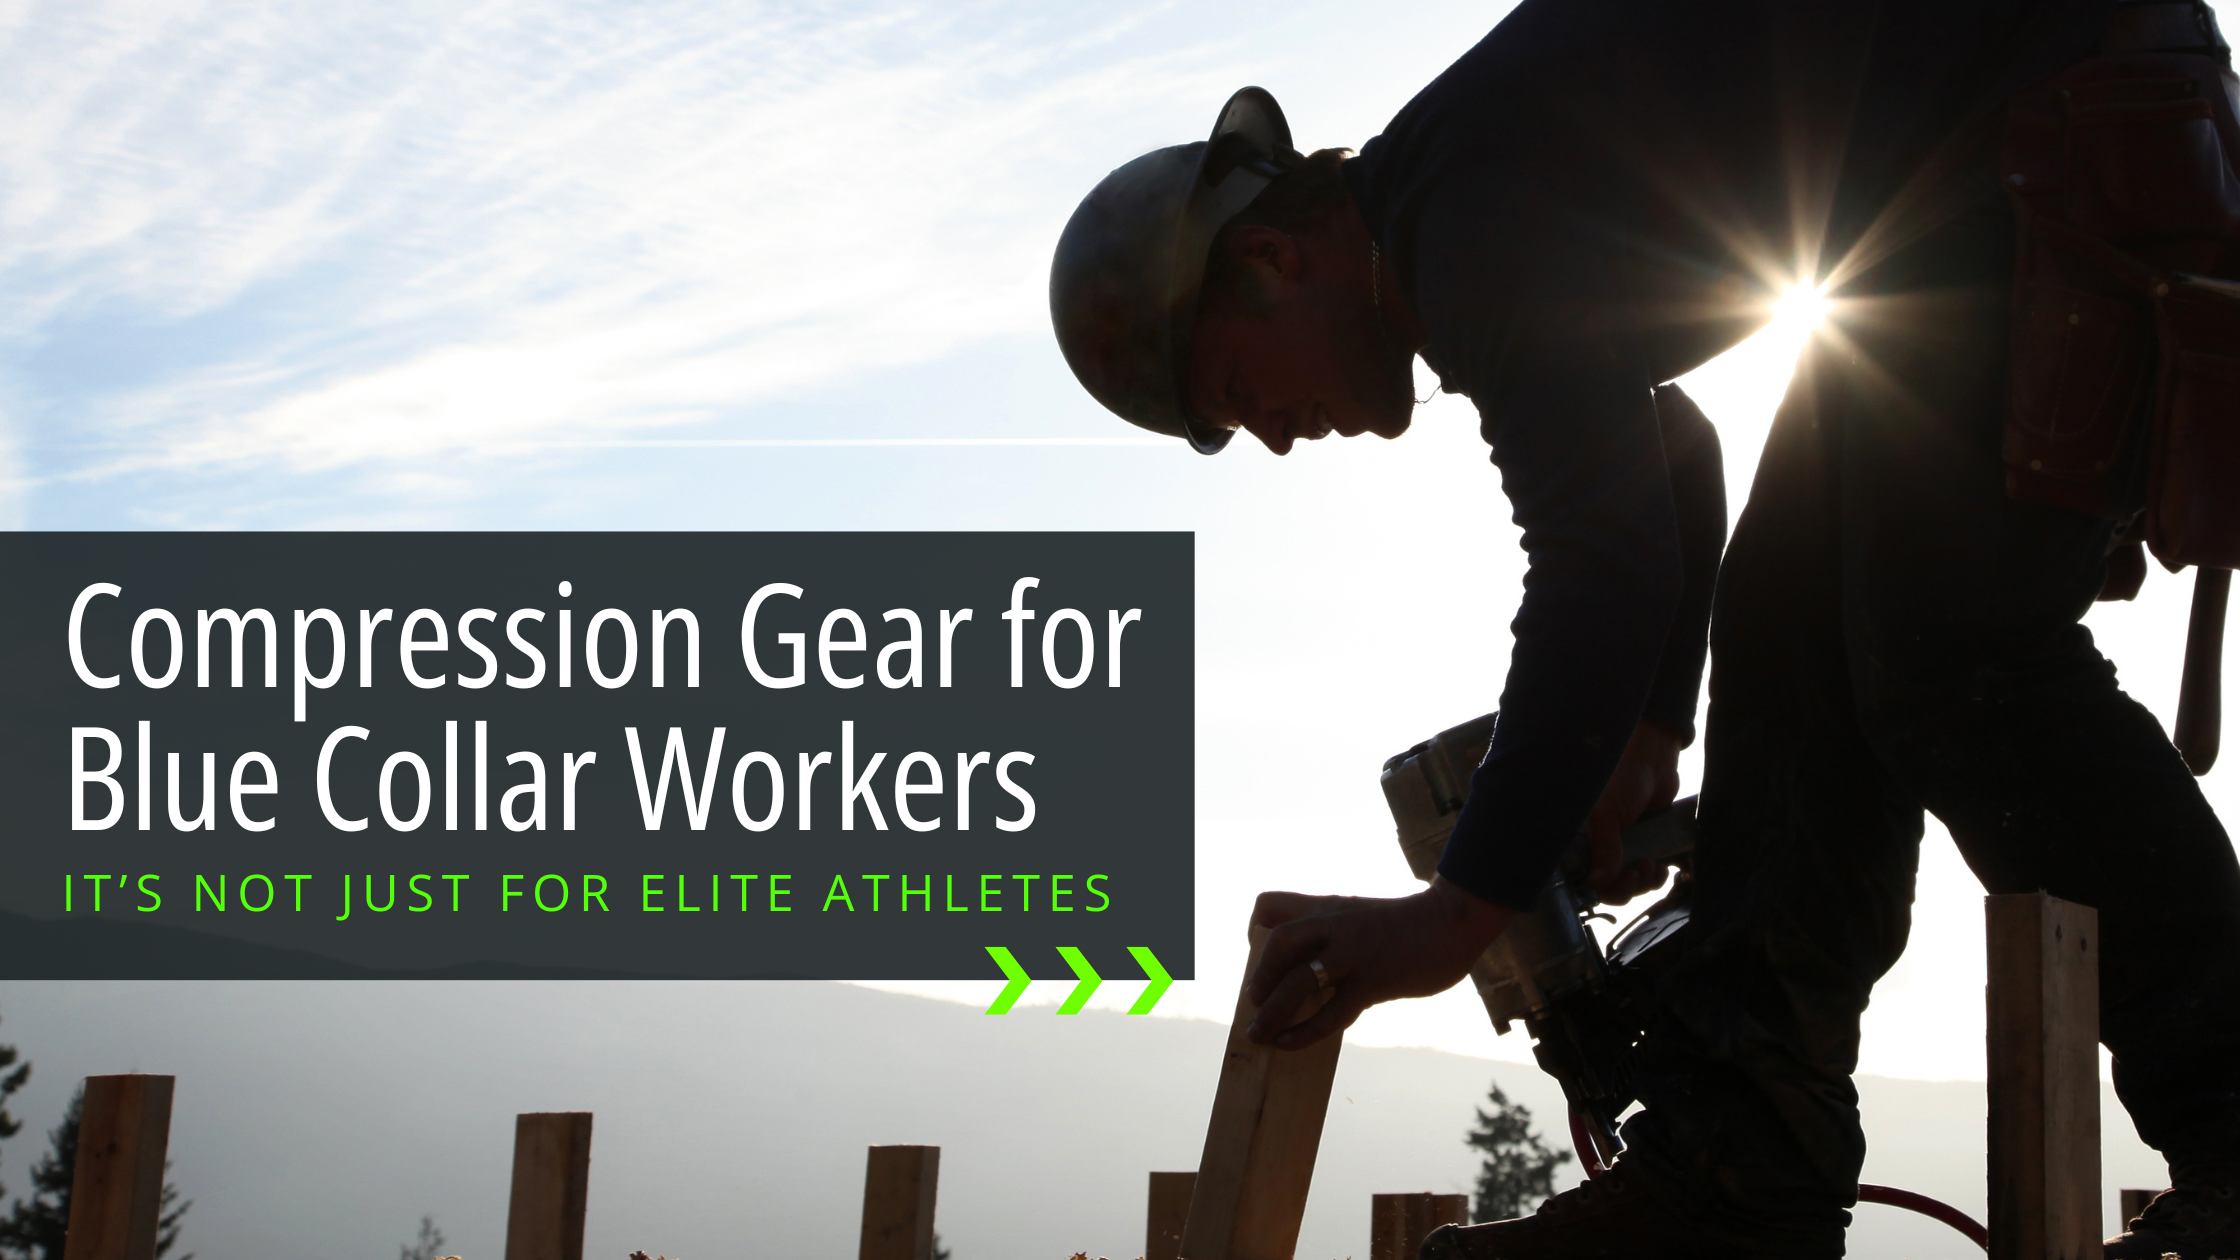 Compression gear for... blue collar workers?